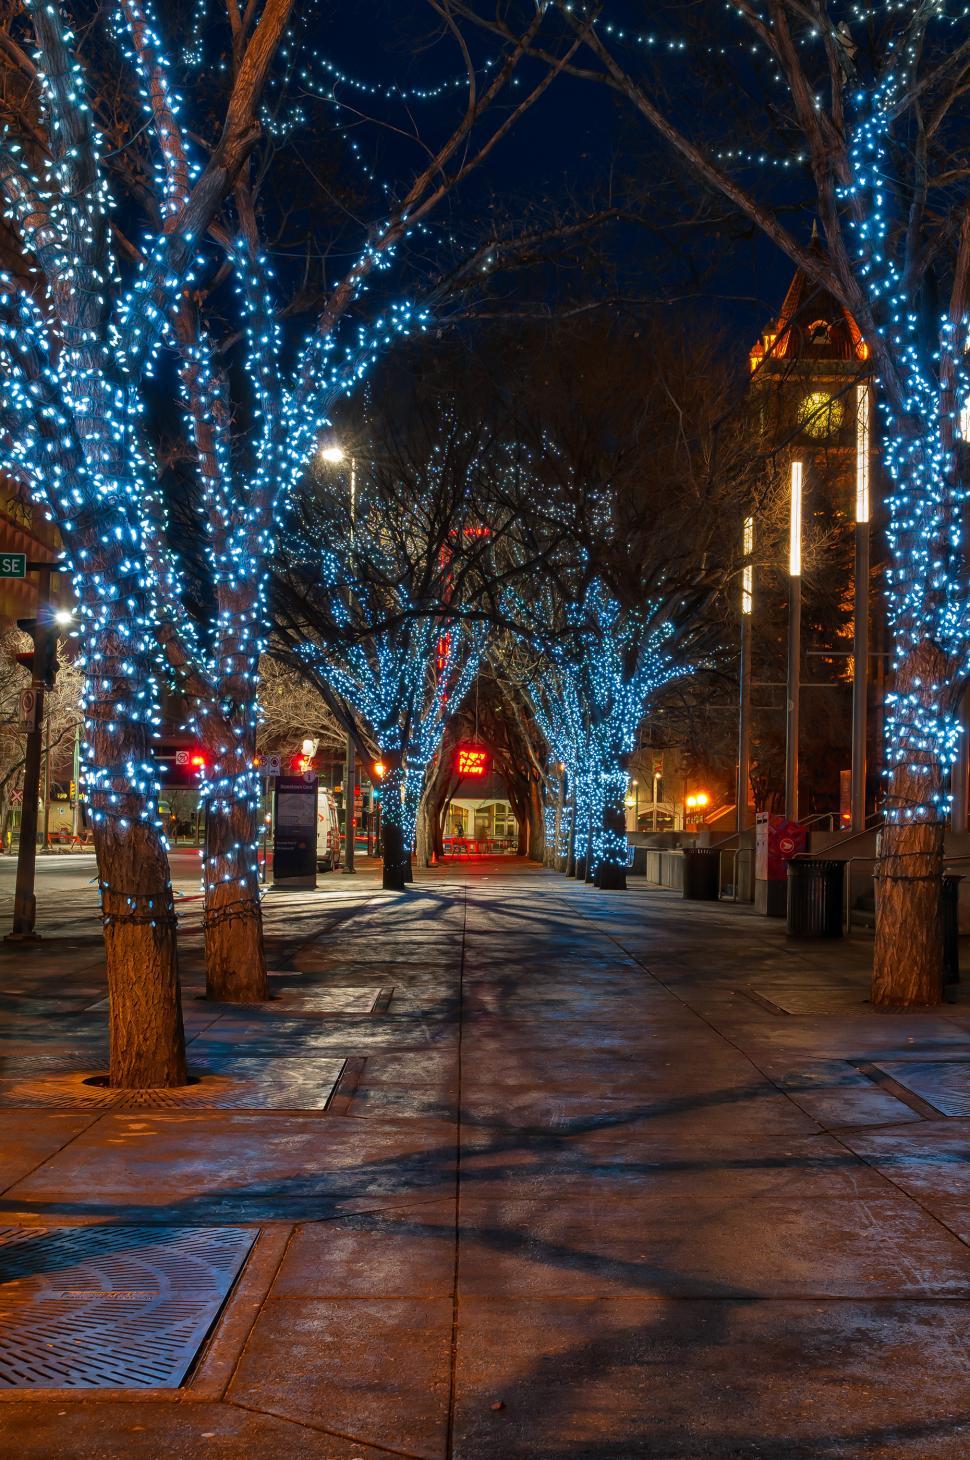 Free Image of Decorated Street 